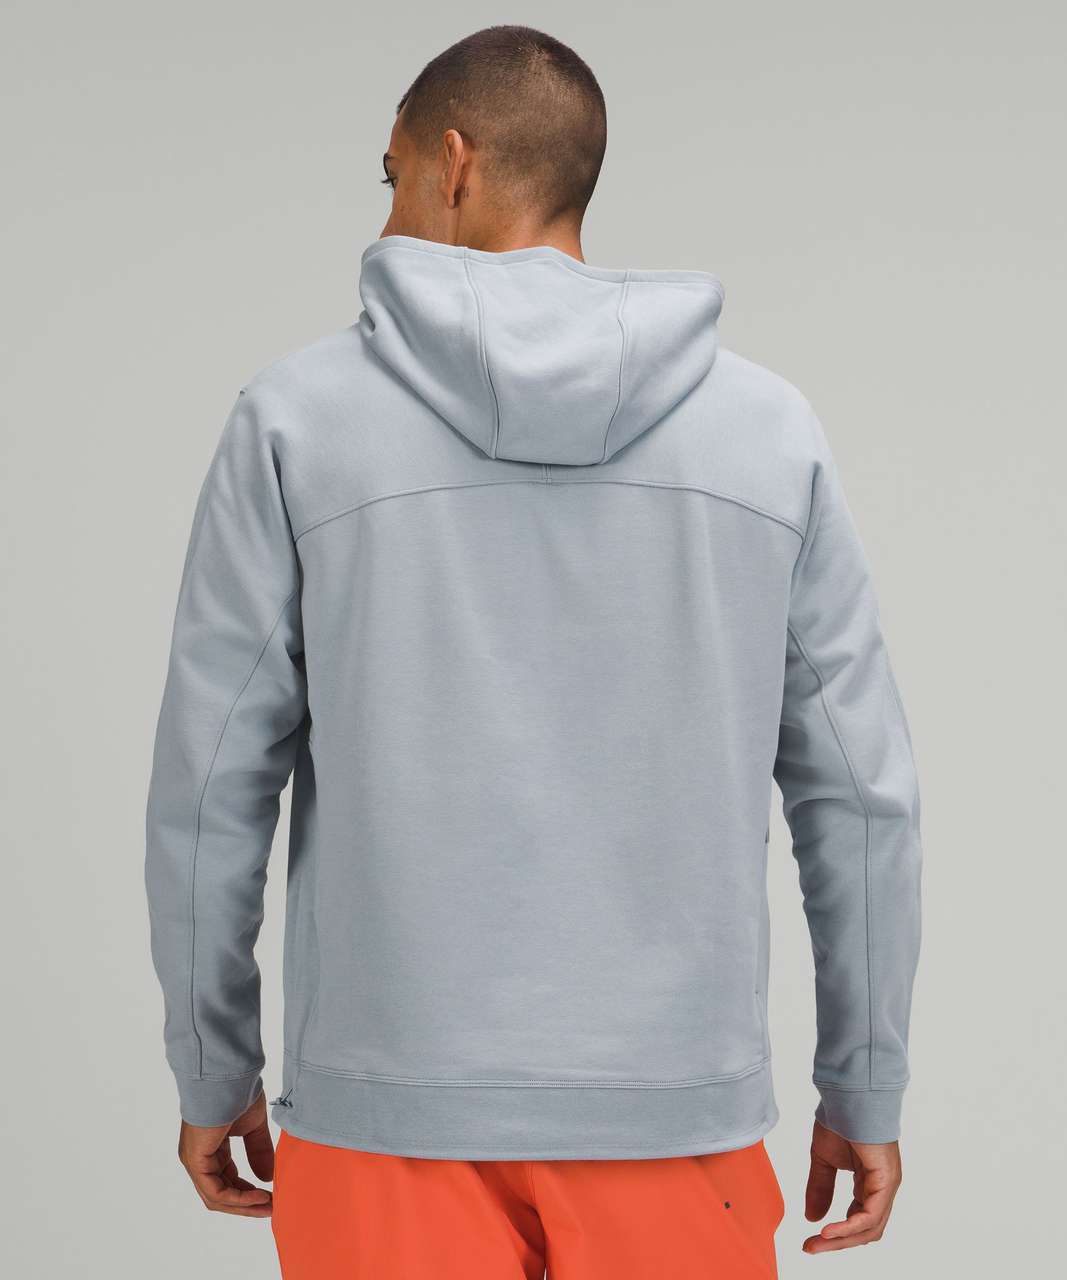 Lululemon French Terry Oversized Hoodie - Chambray